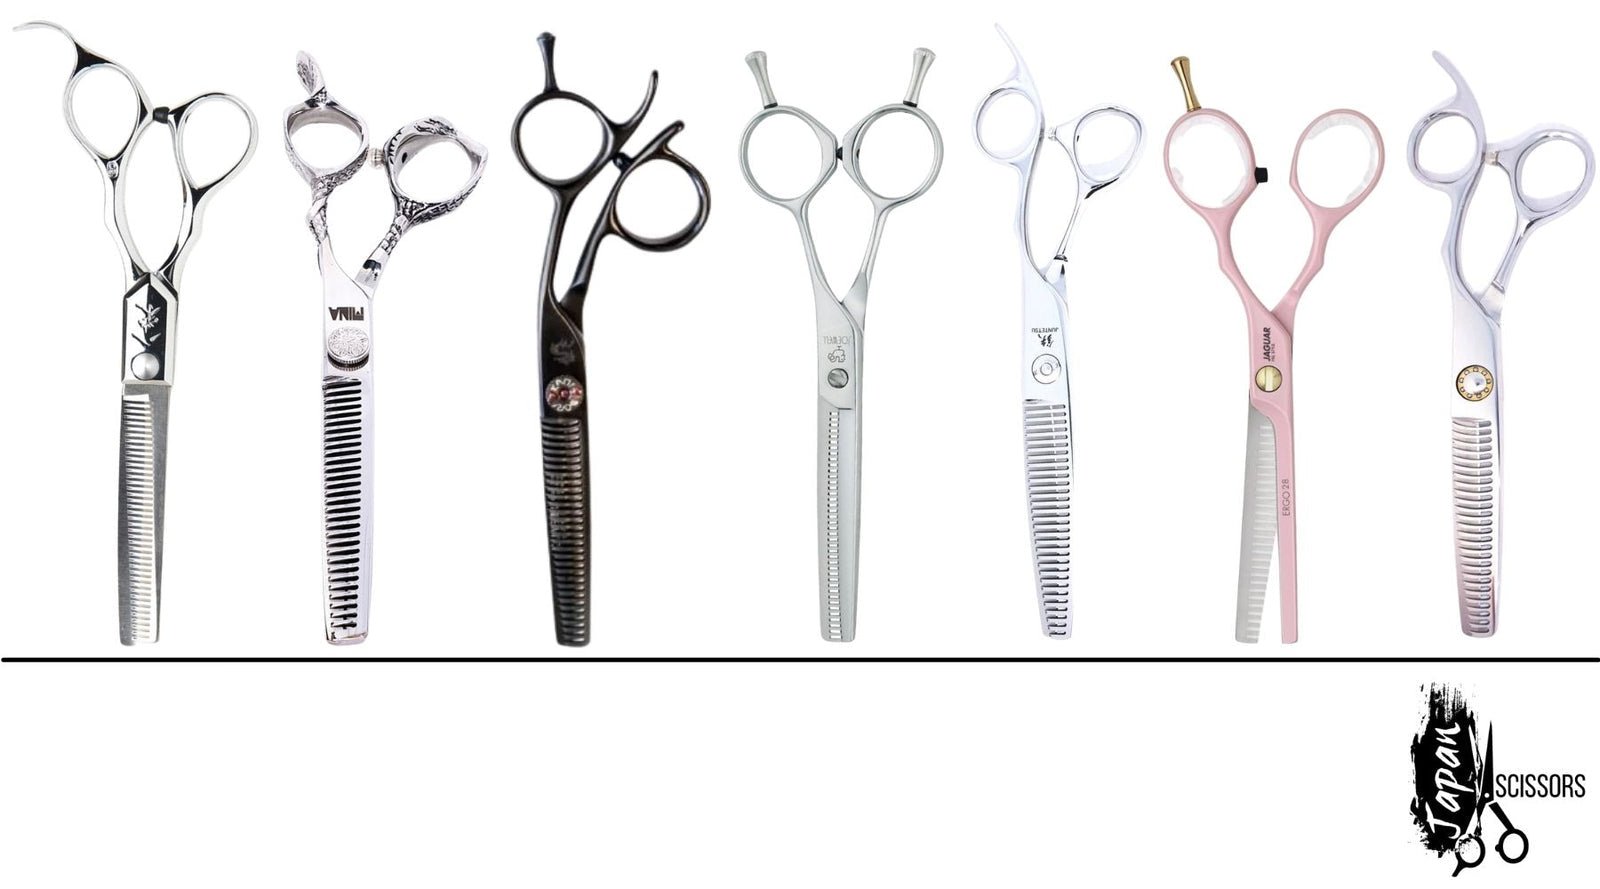 The Top 10 Best Hair Thinning Shears for Professional Hairstylists - Japan Scissors USA